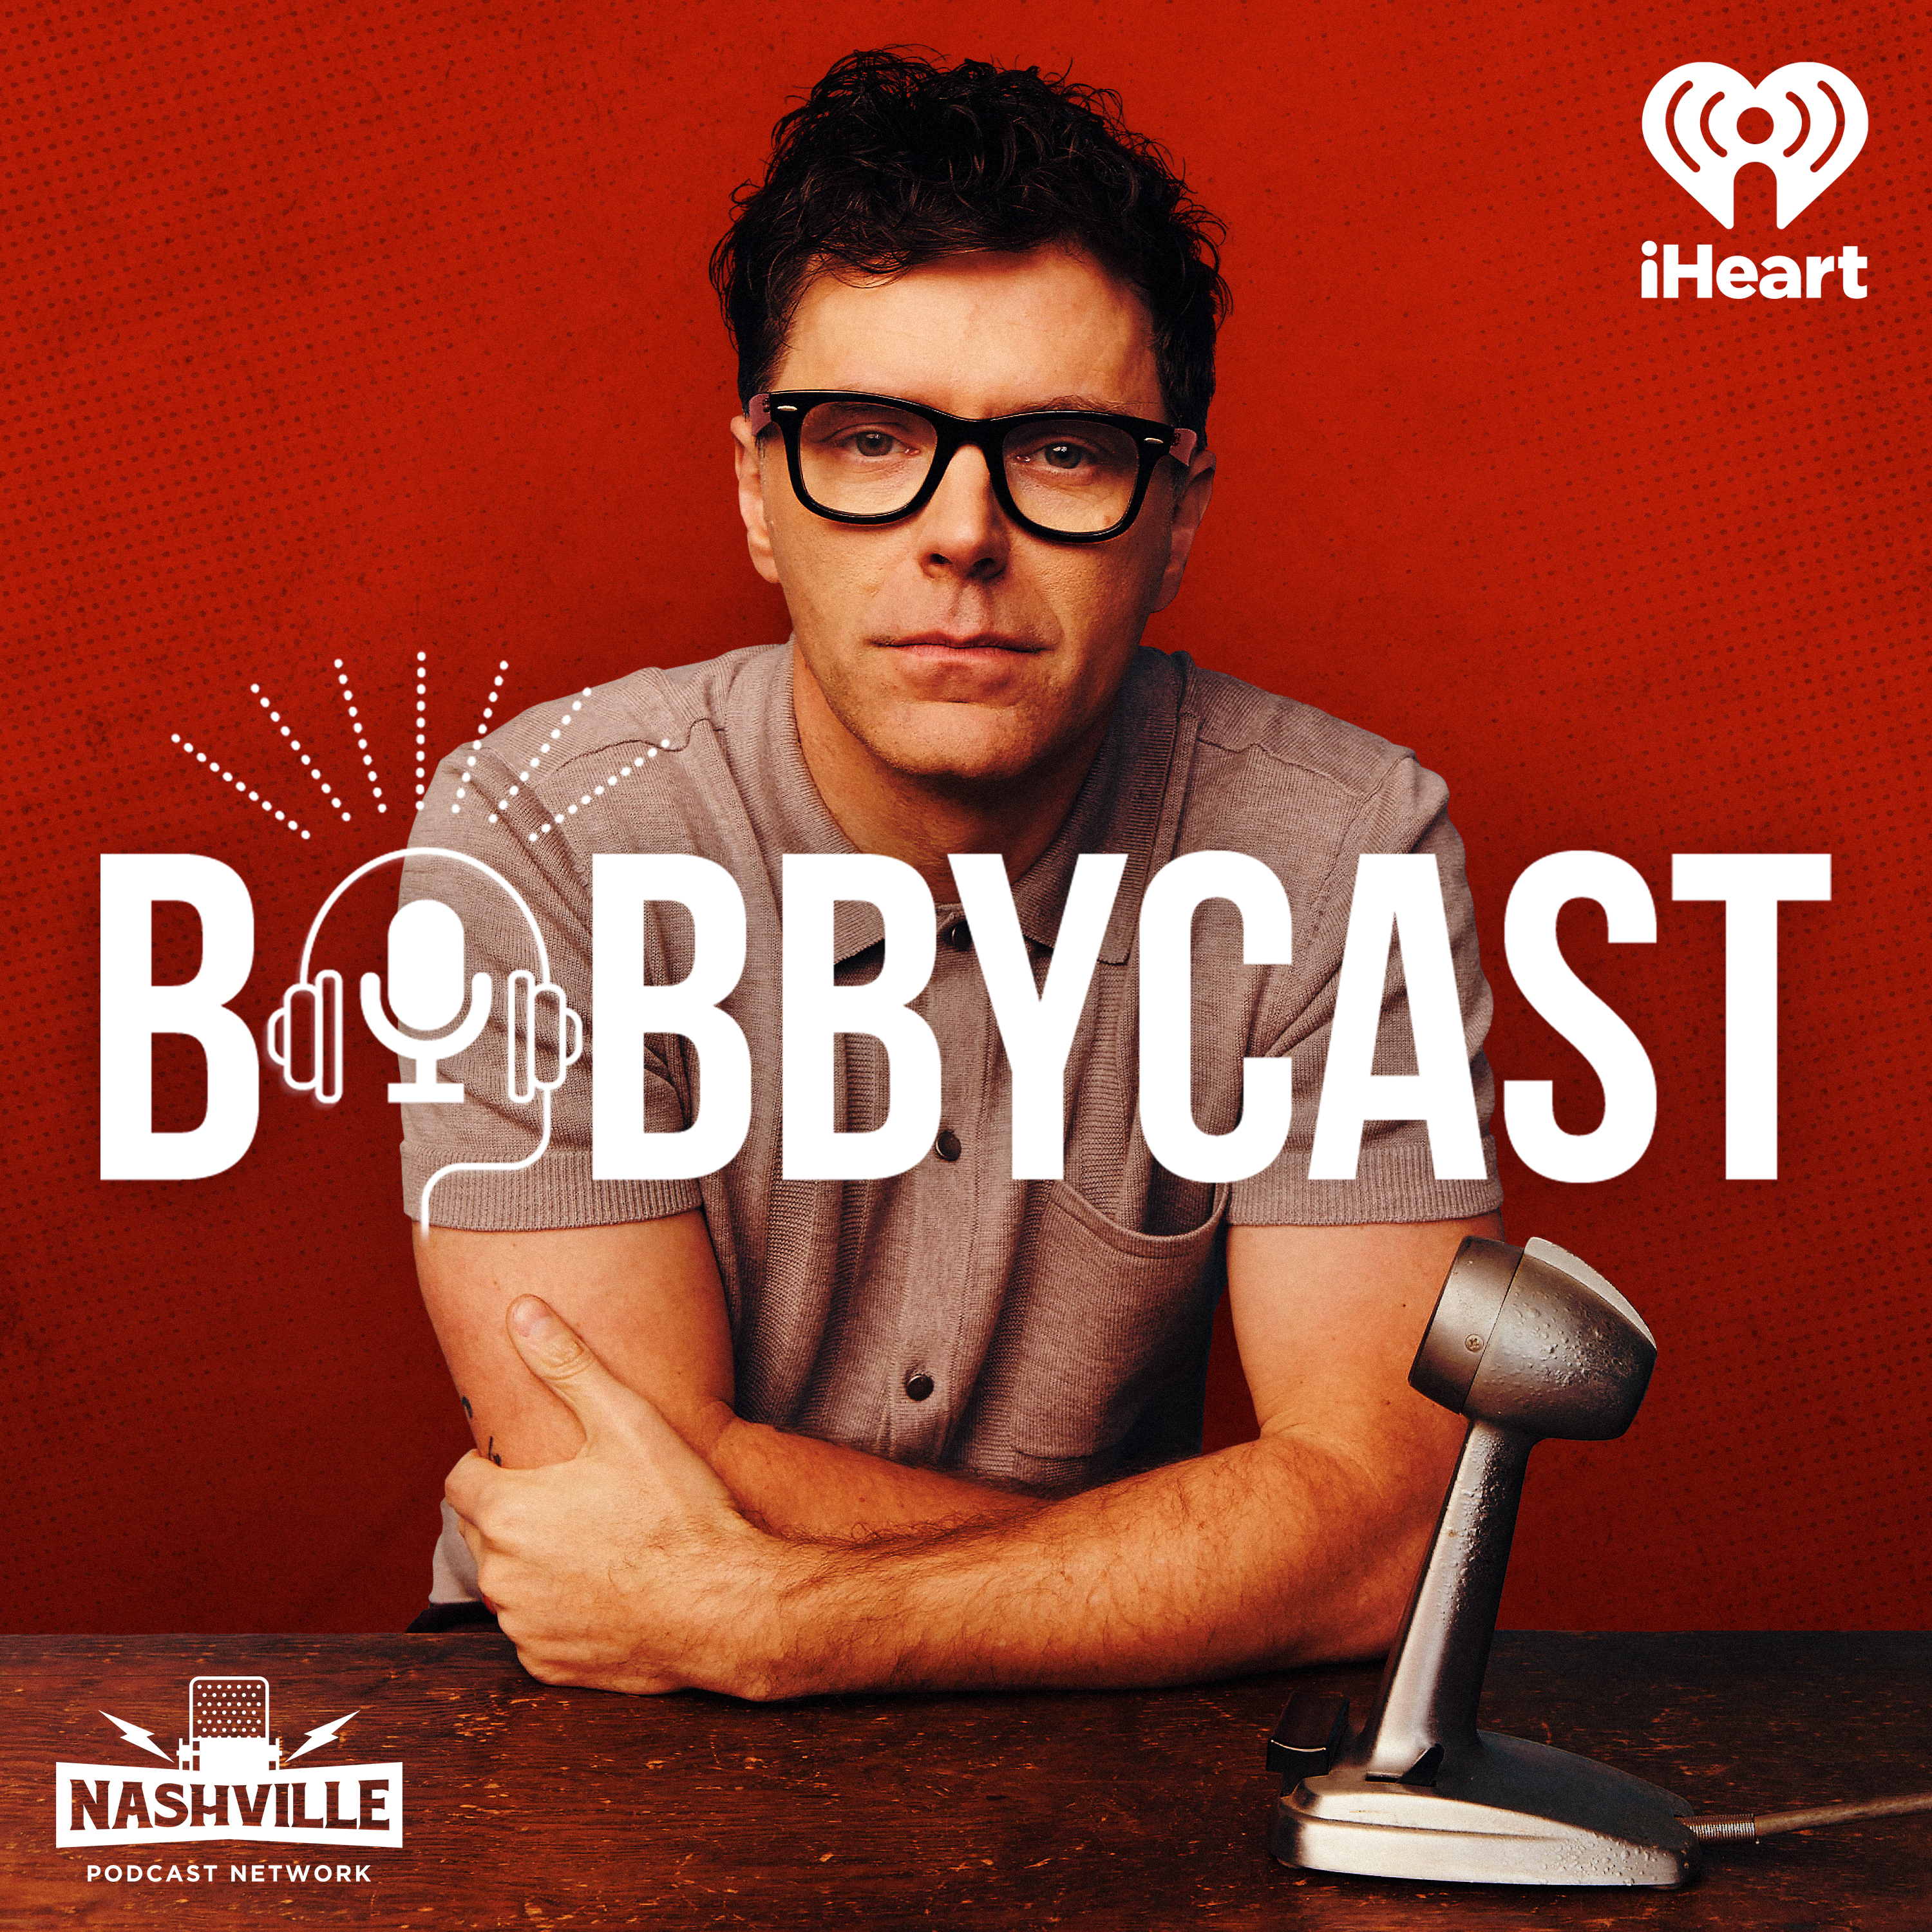 Behind the Scenes of the BobbyCast: Bobby sits down with the President of his Nashville Podcast Network